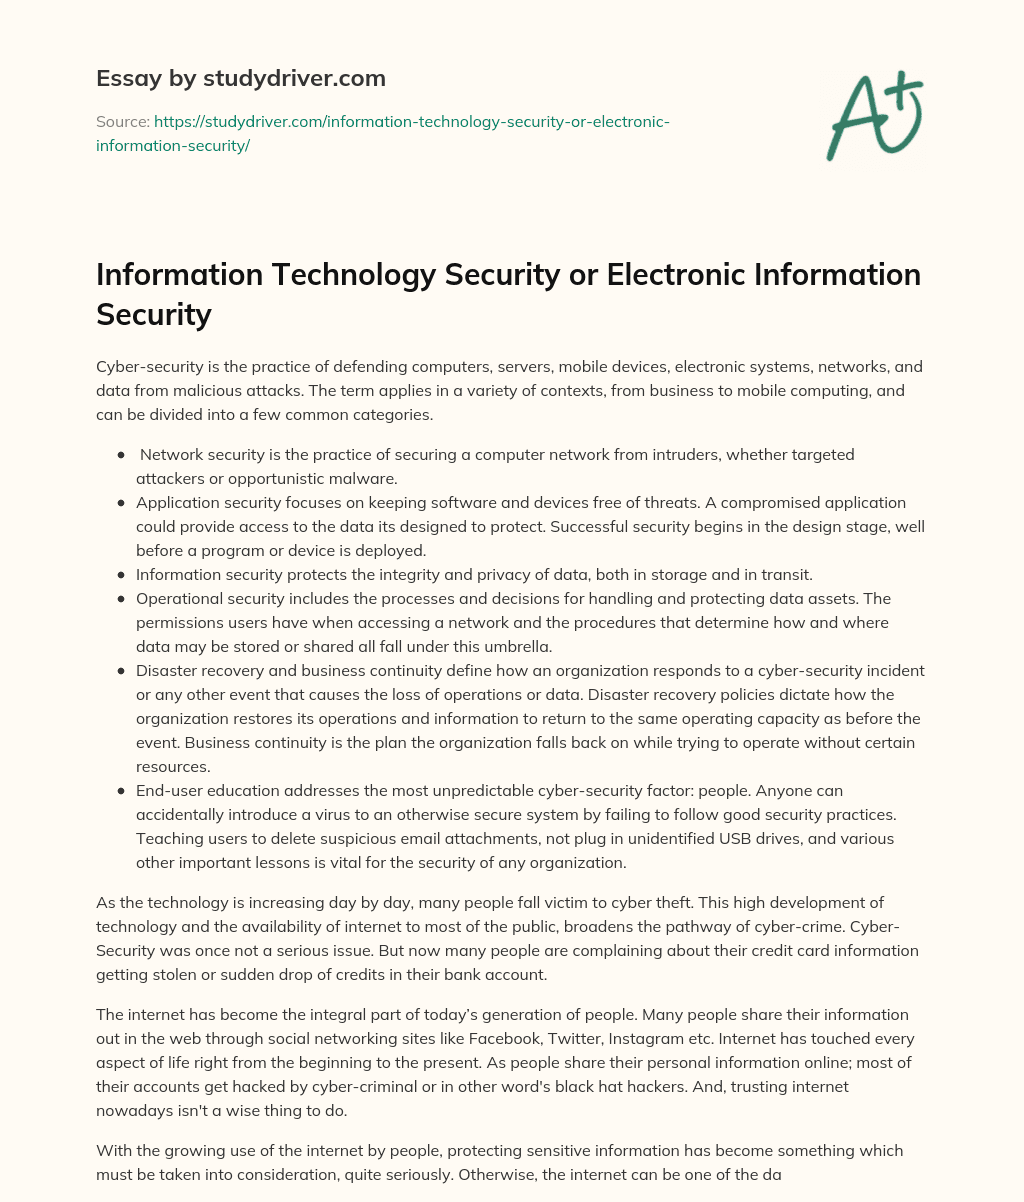 Information Technology Security or Electronic Information Security essay